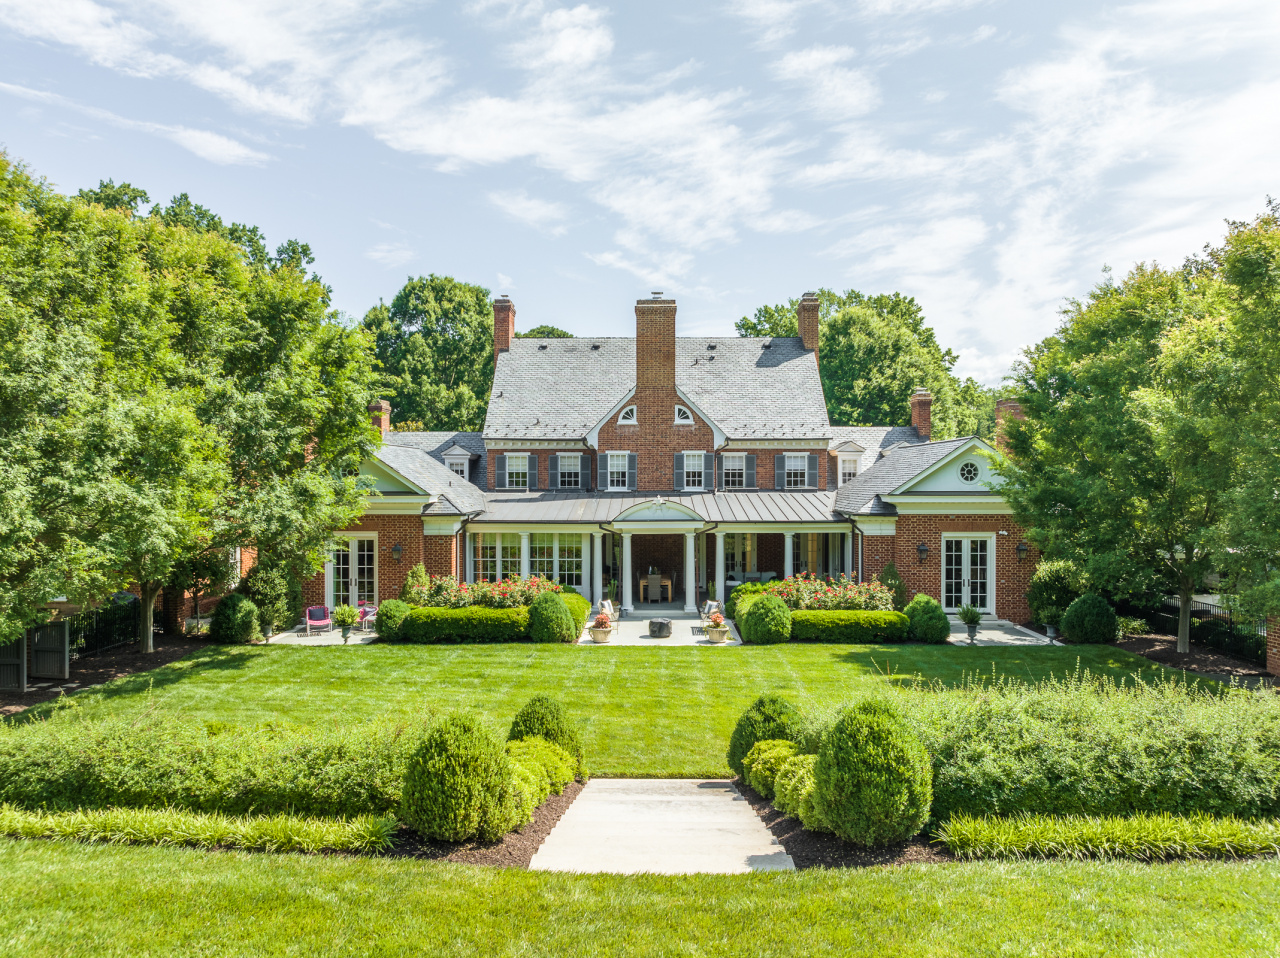 Expansive bluestone covered porch overlooks the meticulously landscaped grounds